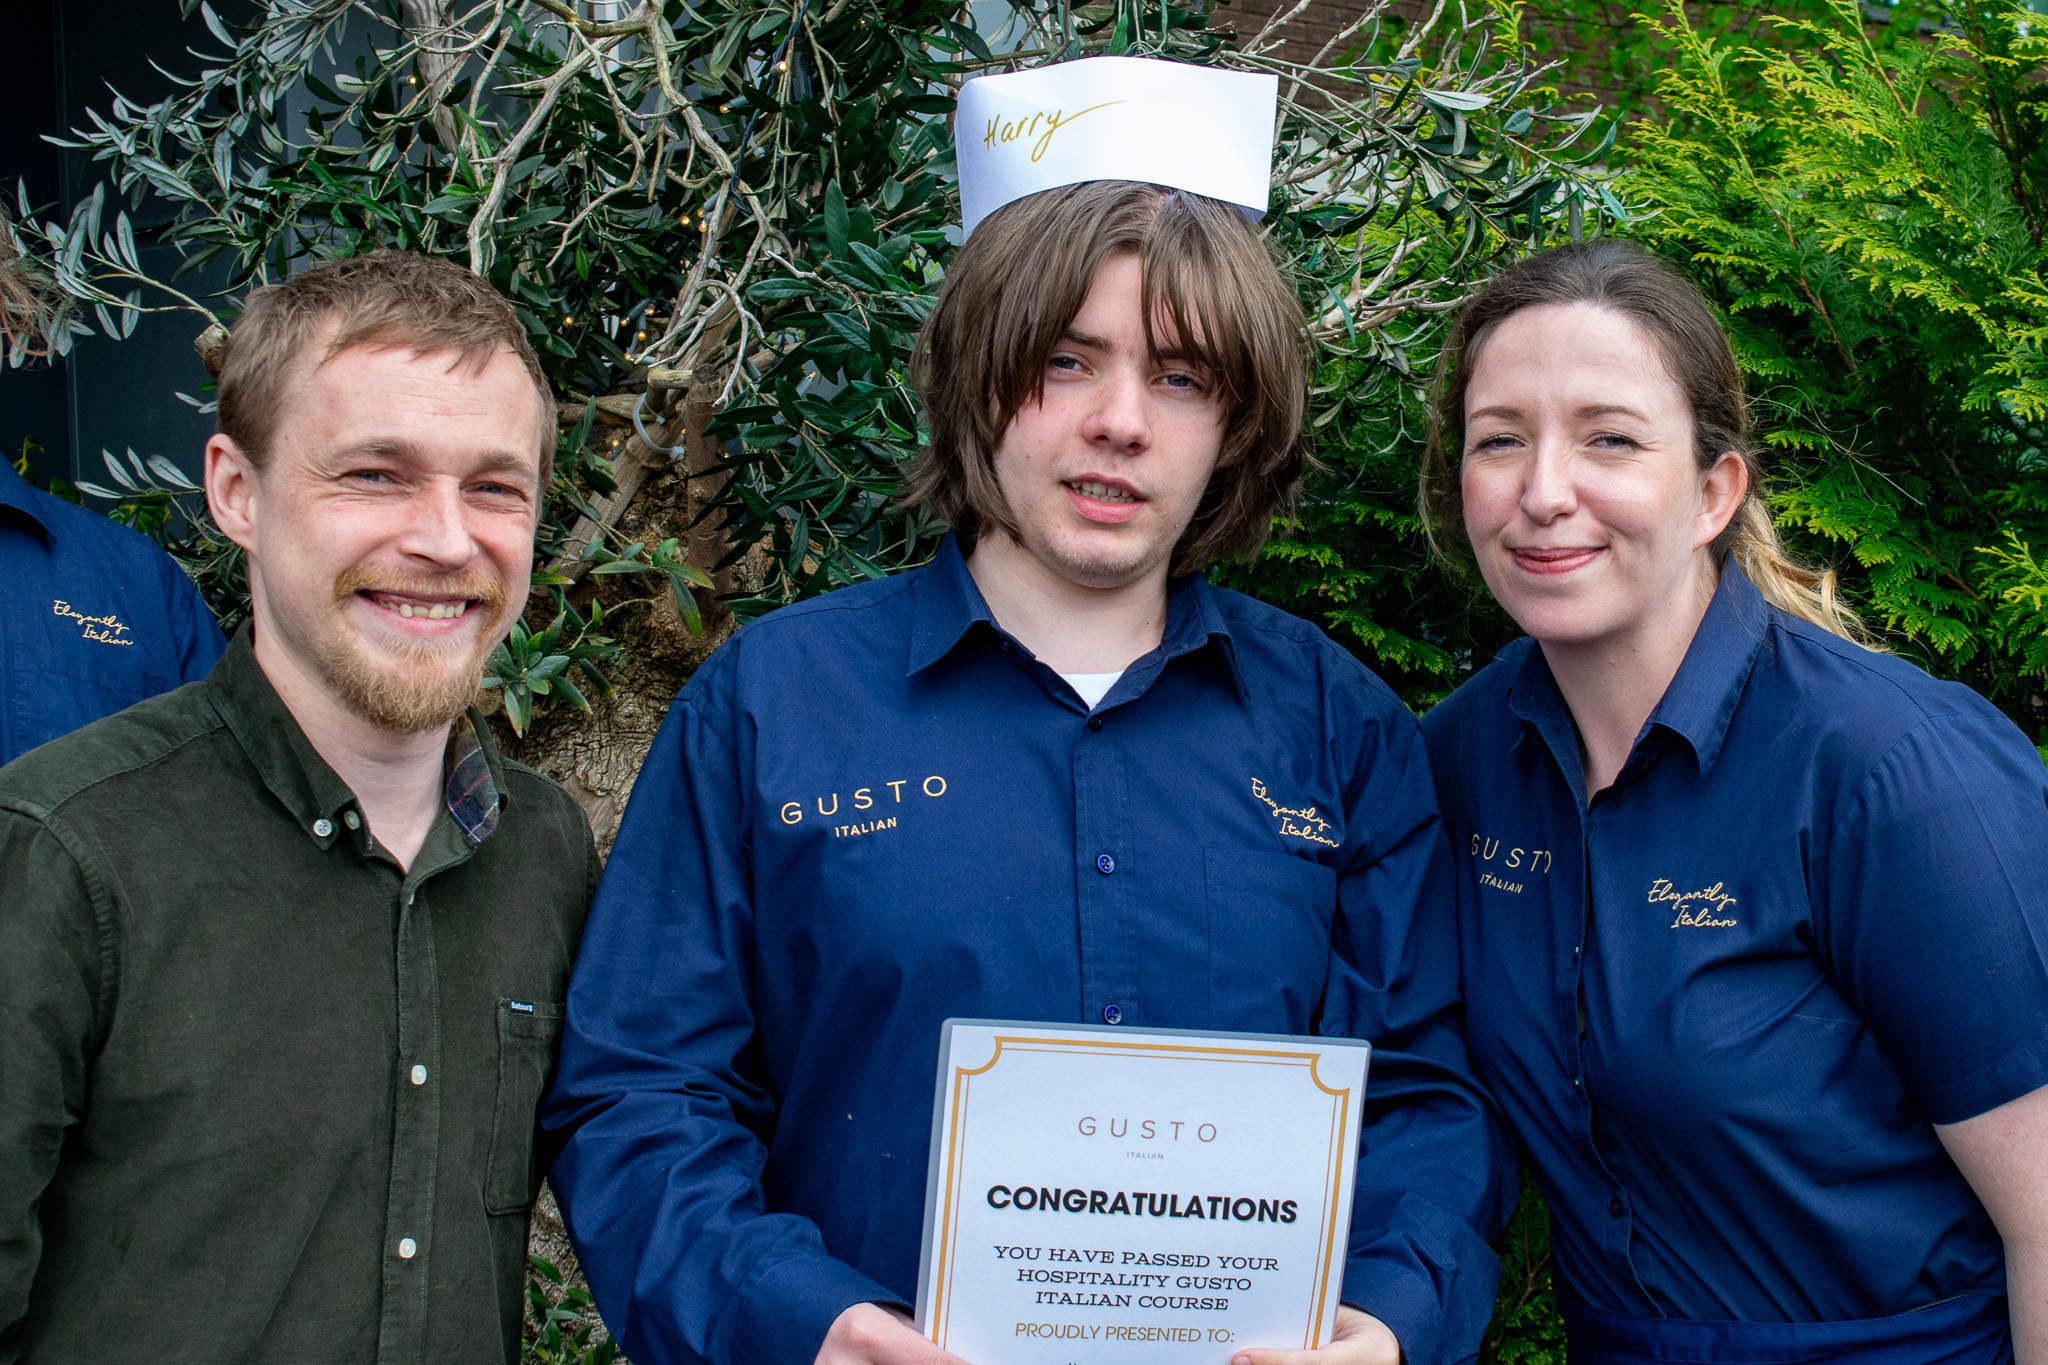 Two staff members from Gusto posing with a student holding a certificate and wearing a paper chef hat.